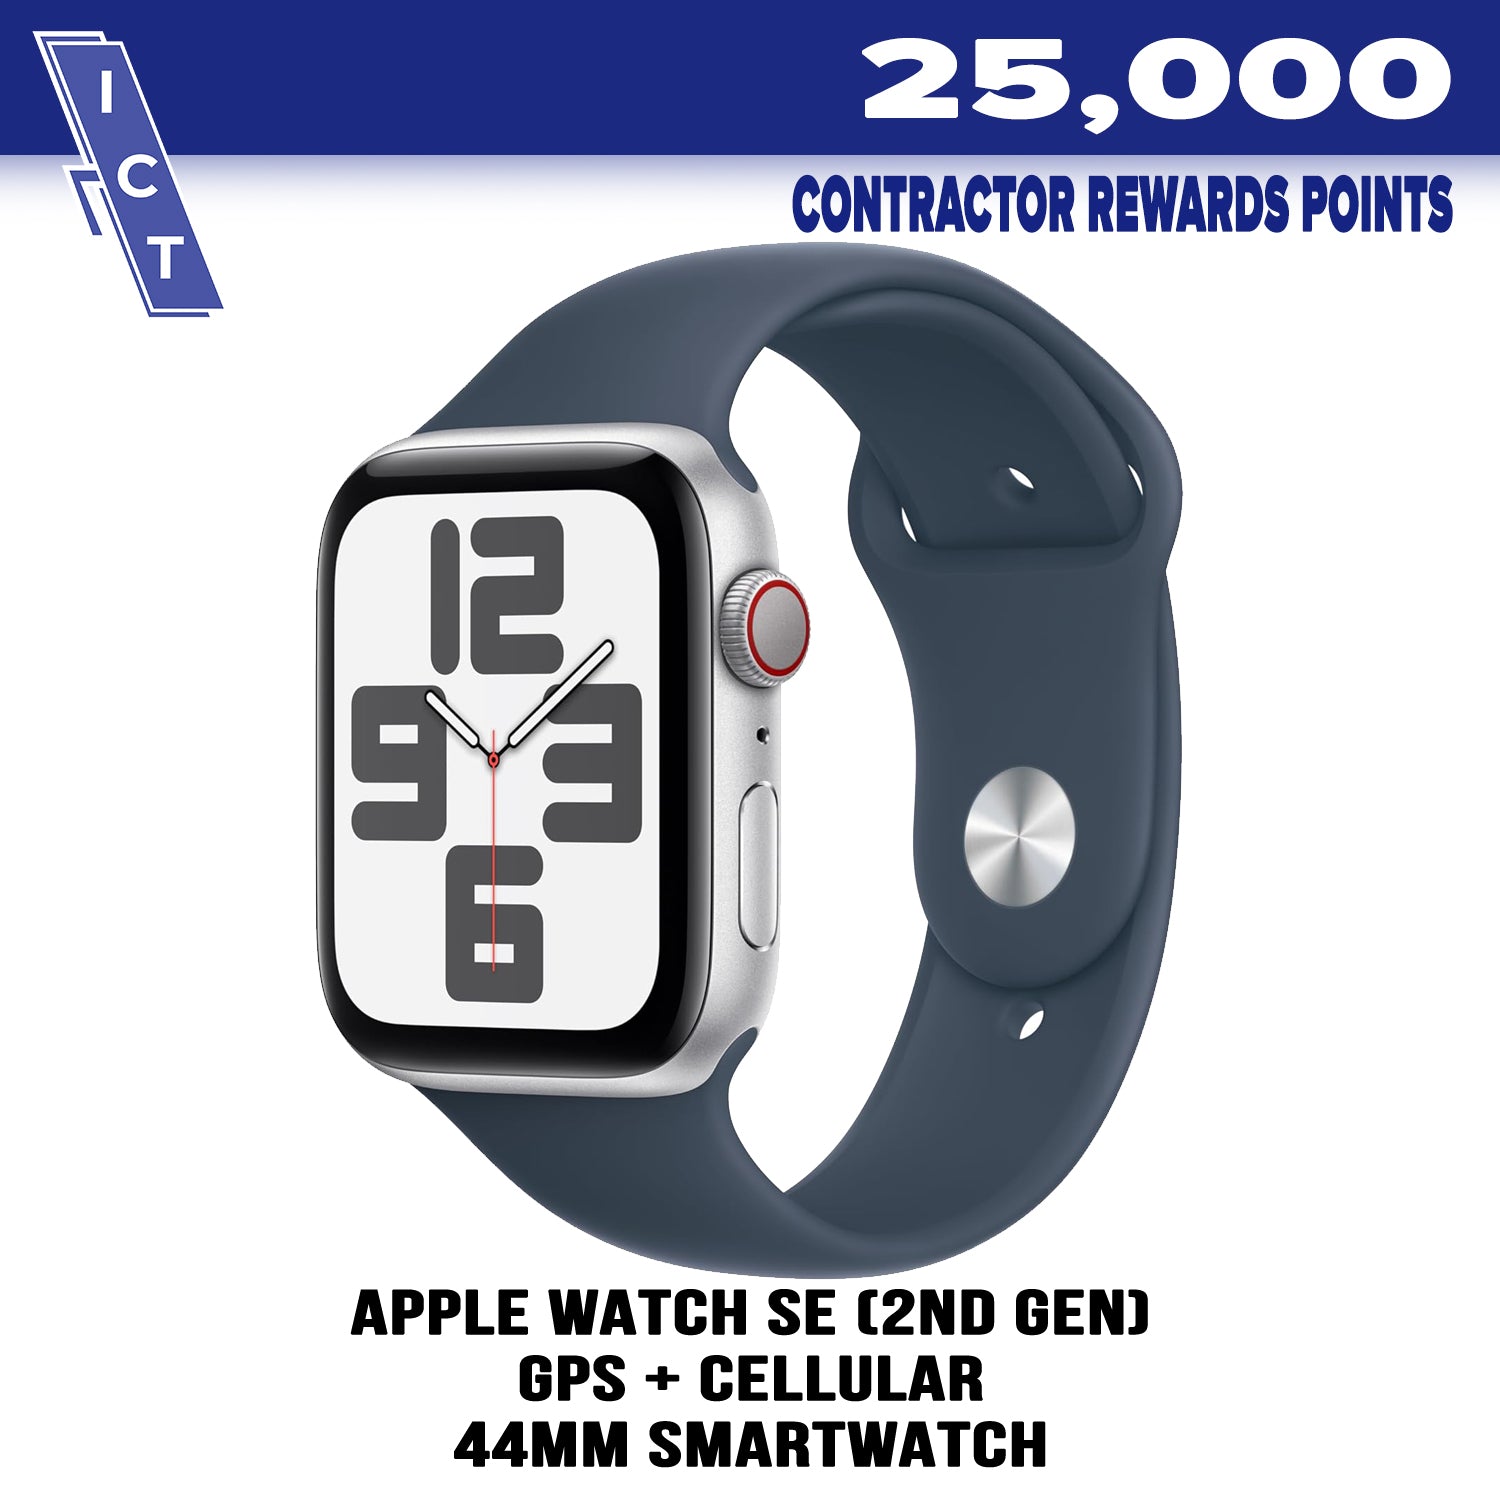 Apple Watch SE second generation prize for 25000 points